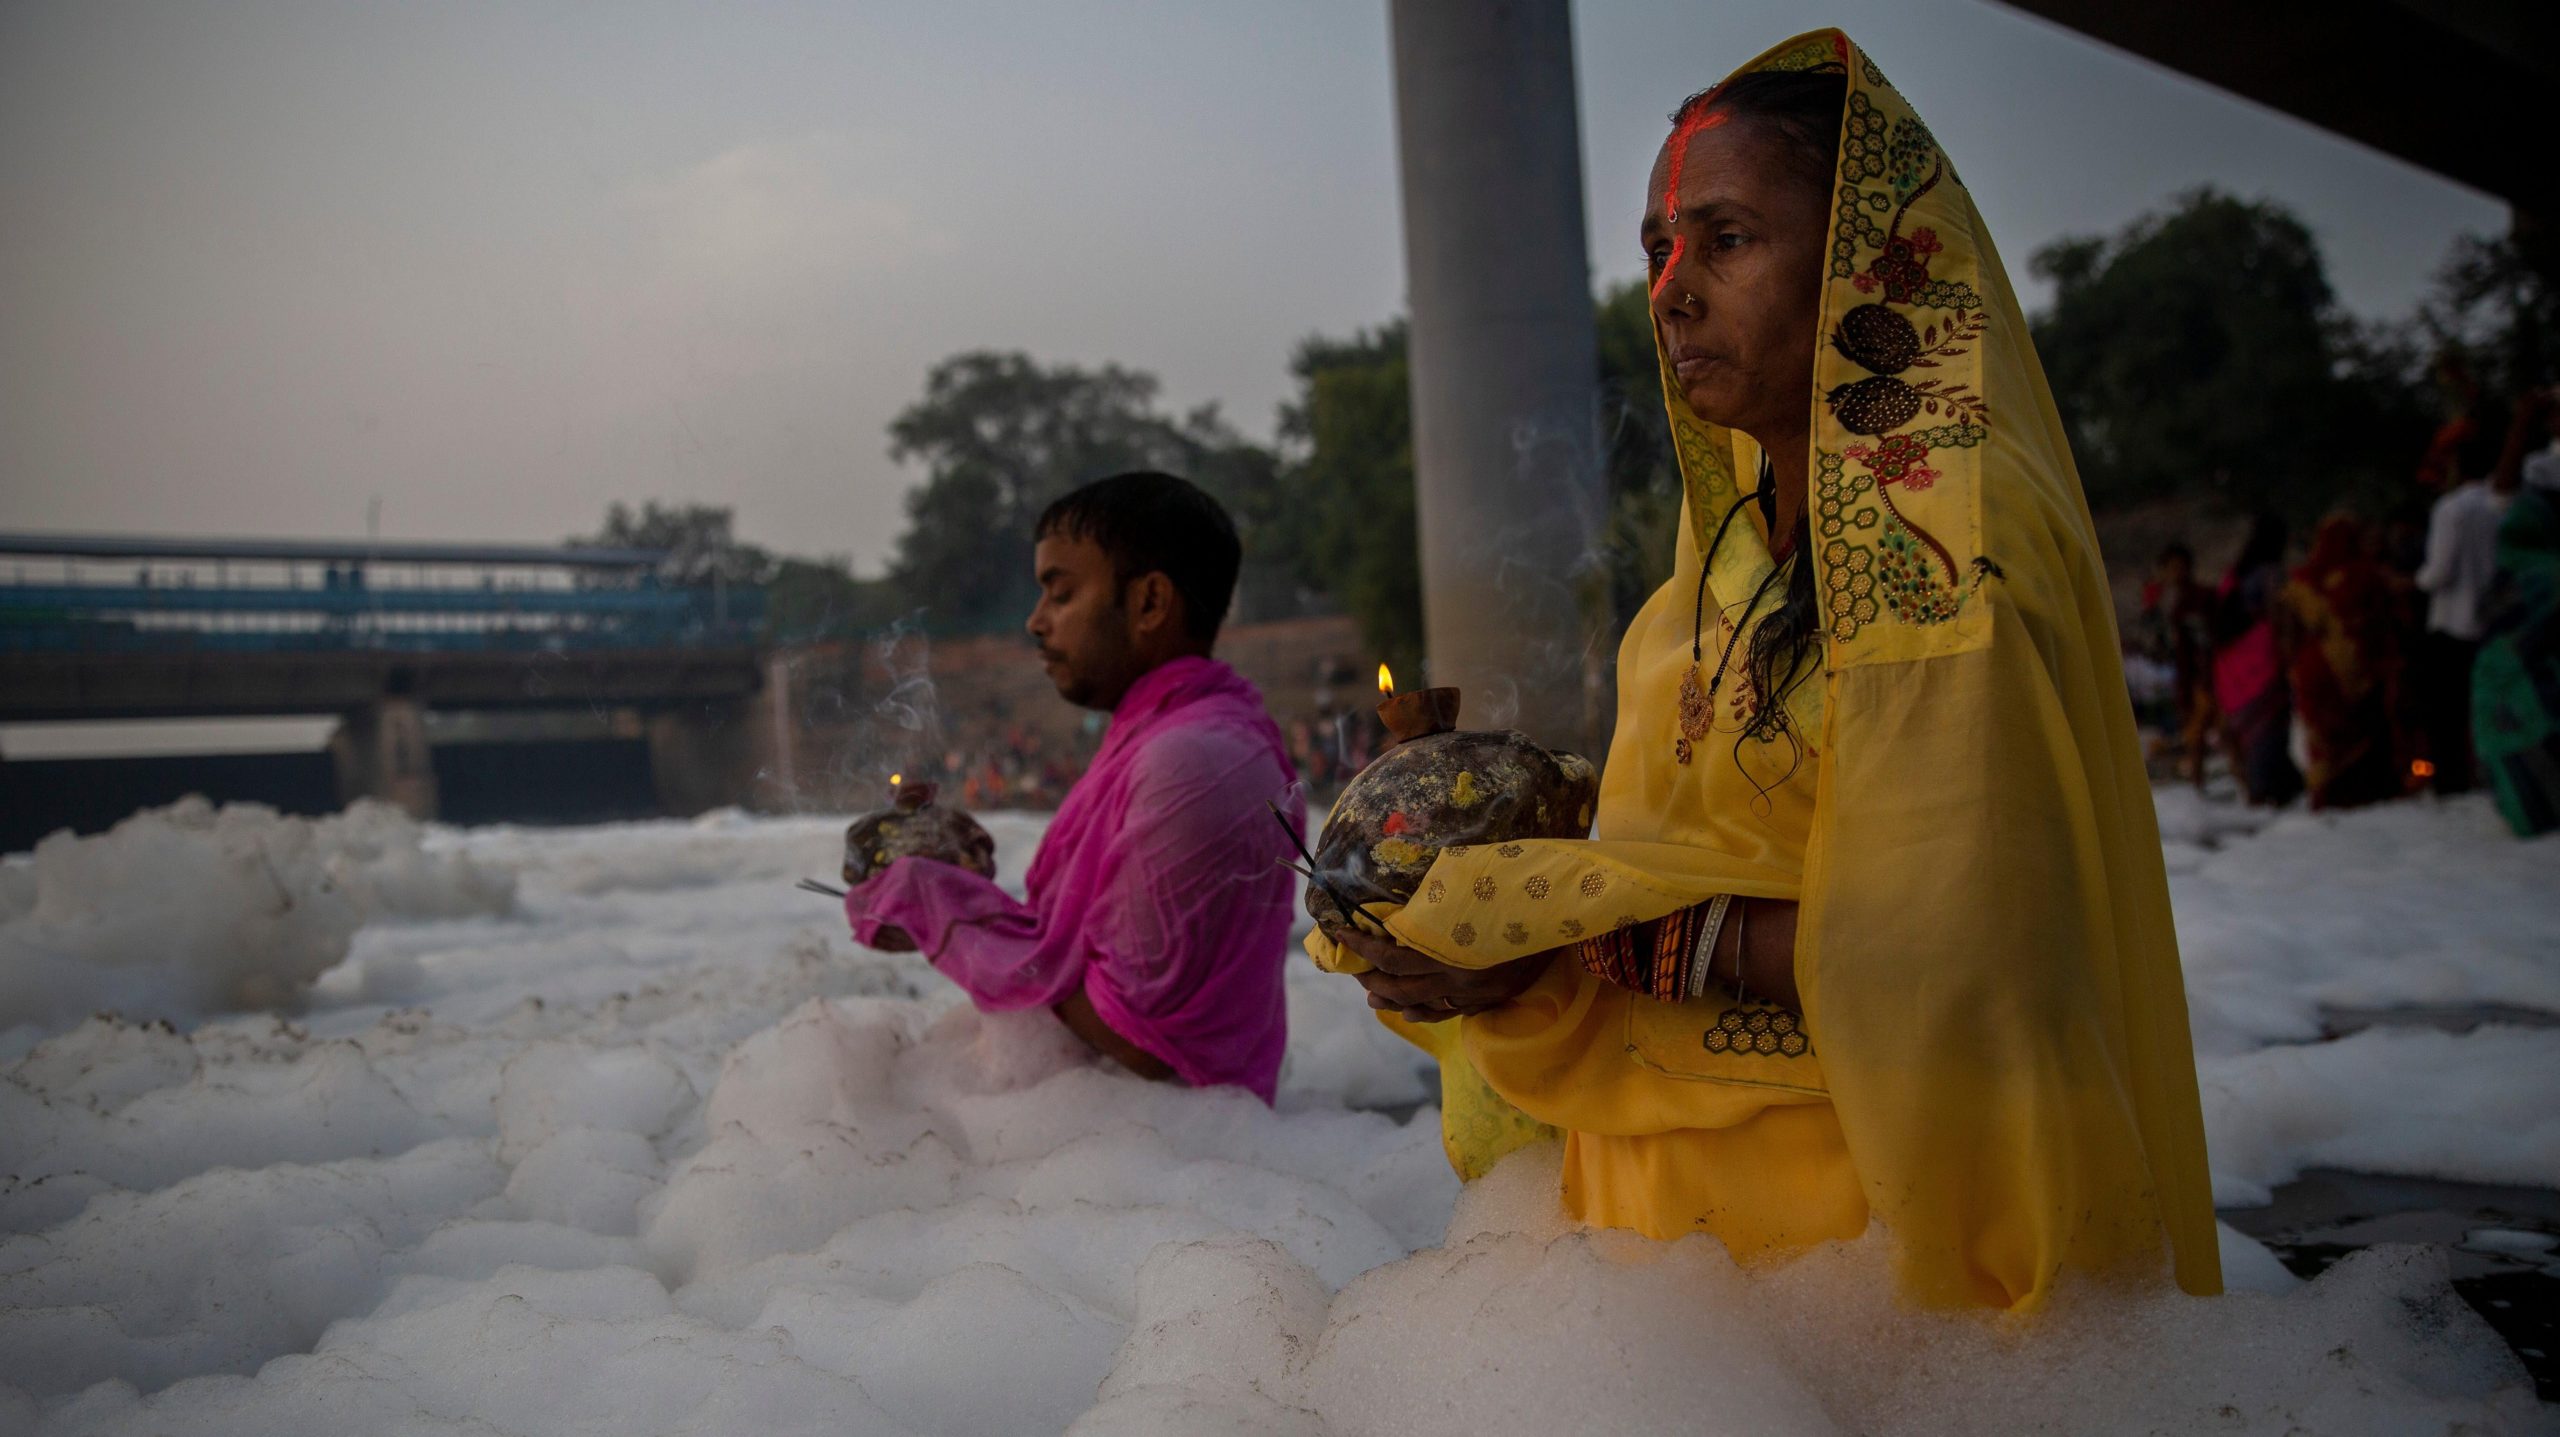 People perform rituals in Yamuna river, covered by chemical foam caused due to industrial and domestic pollution, during Chhath Puja festival. (Photo: Altaf Qadri, AP)